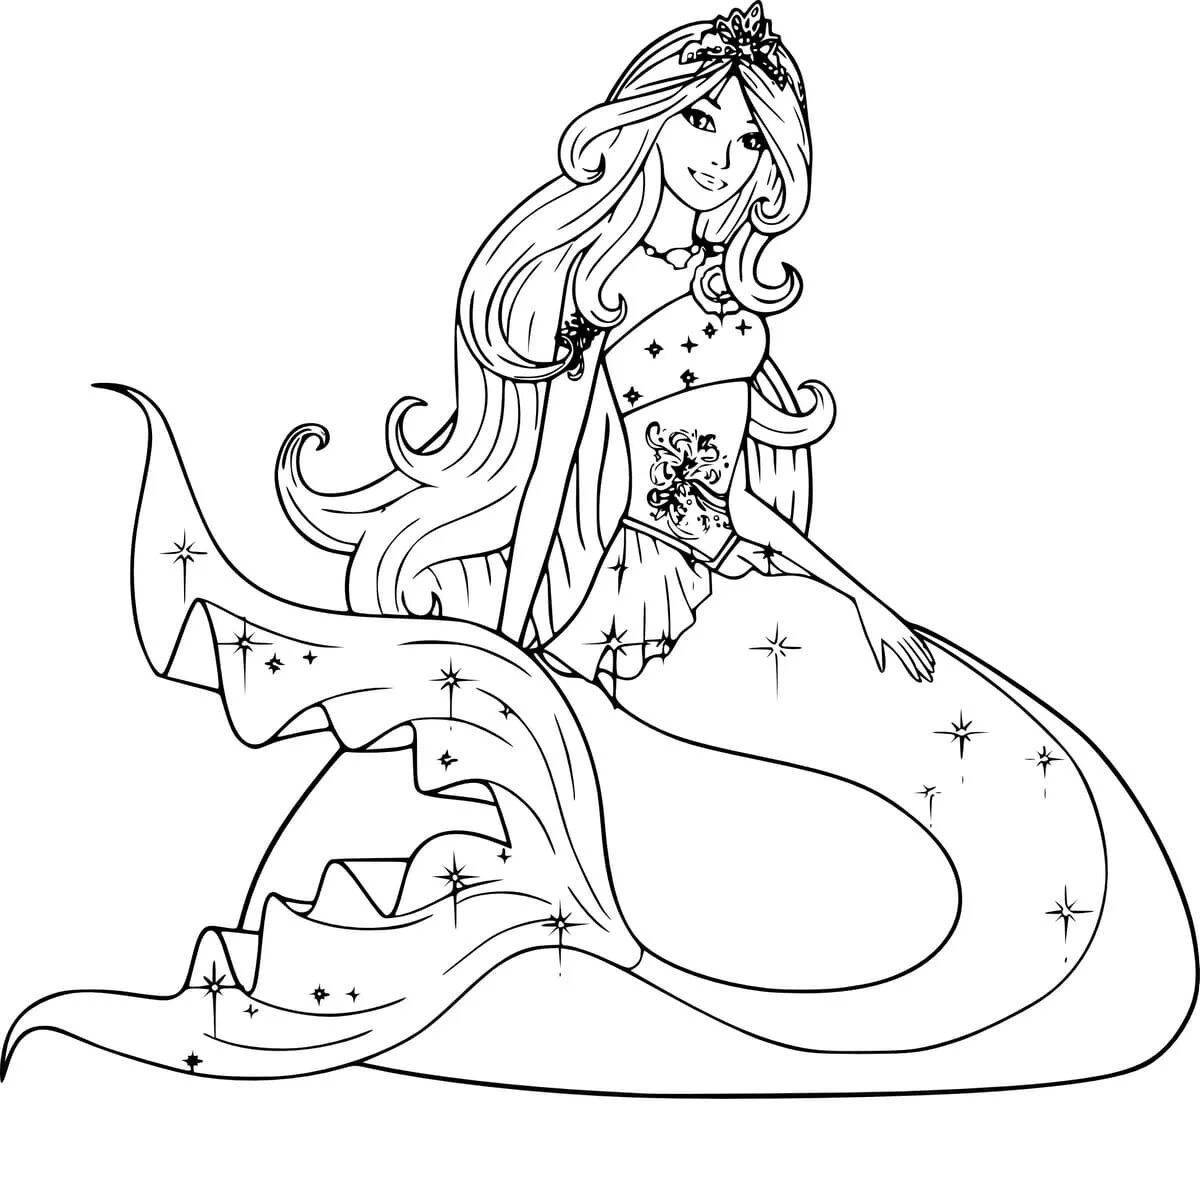 Radiant coloring page mermaid games for girls